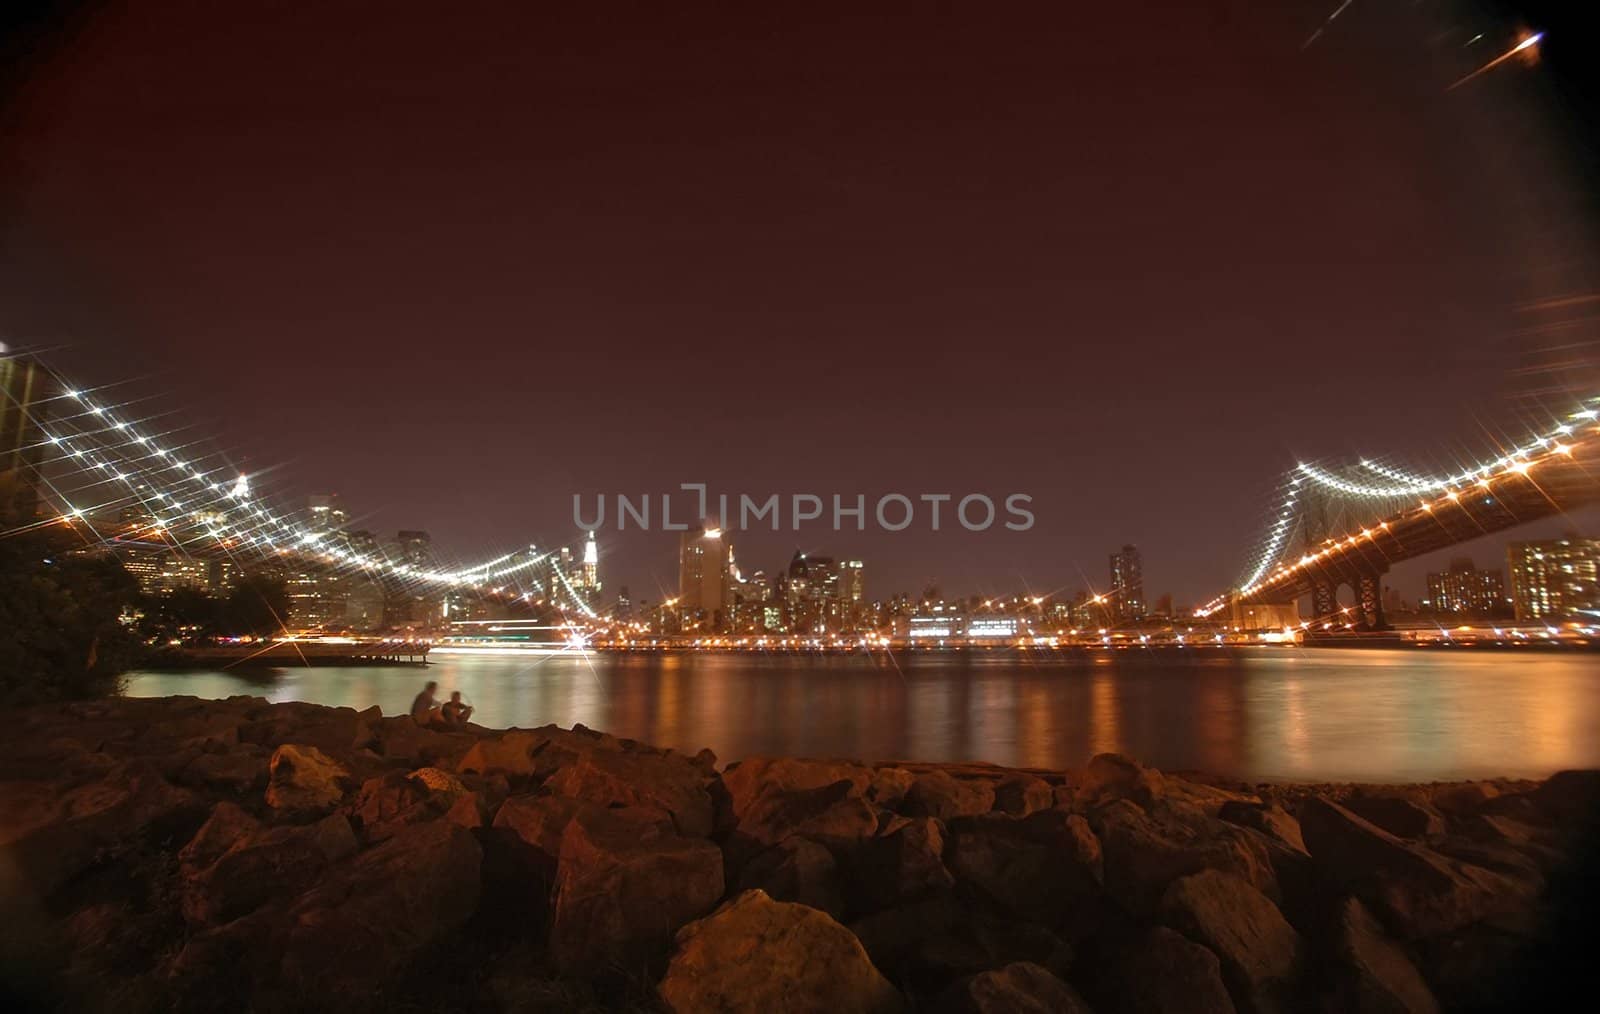 brooklyn and manhattan bridge night photo, rocks in foreground, star filter used to bring up the lights